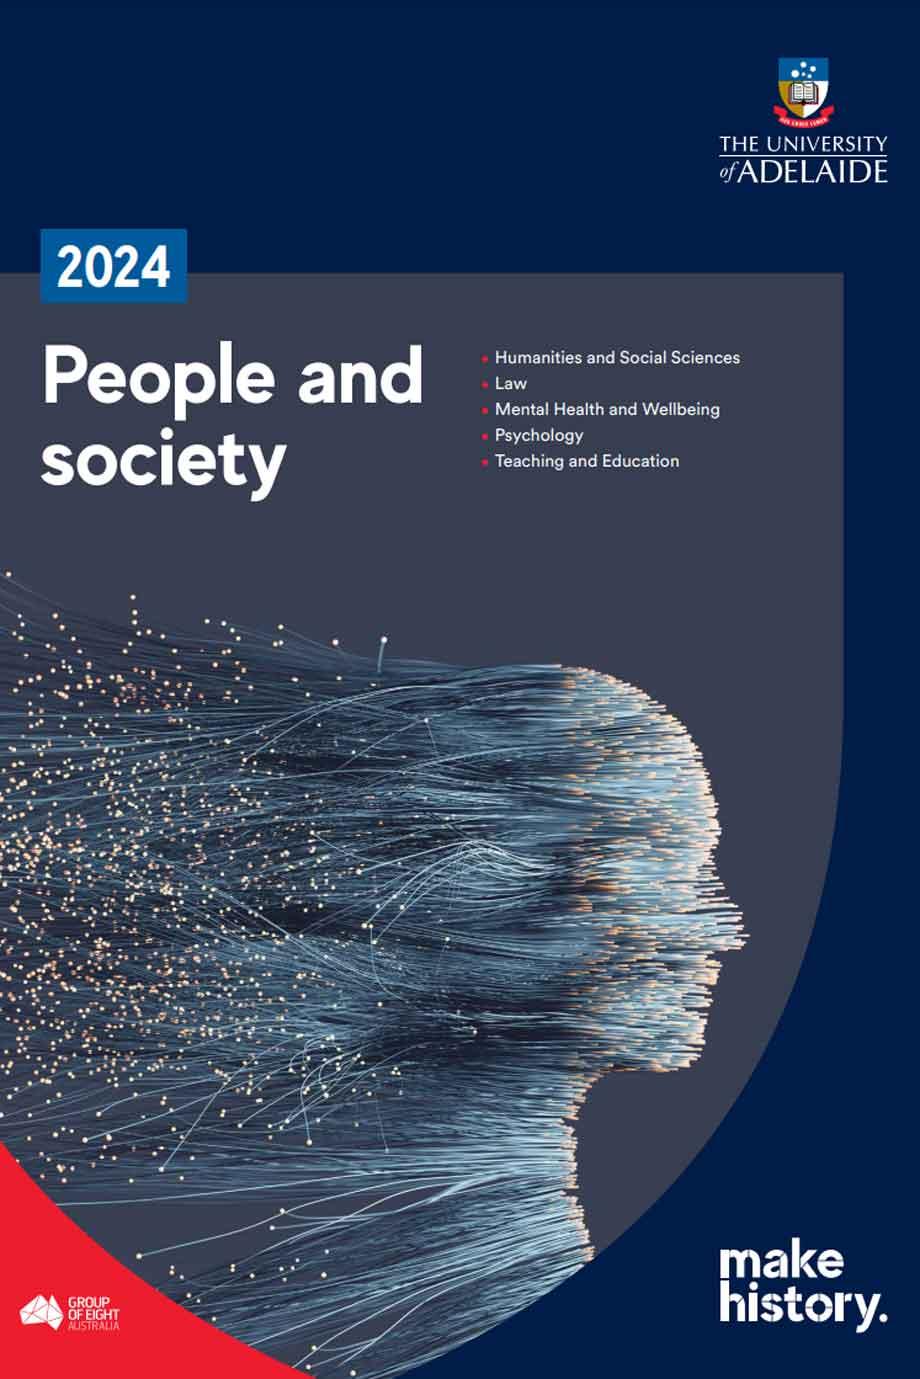 2024 People and society program guide